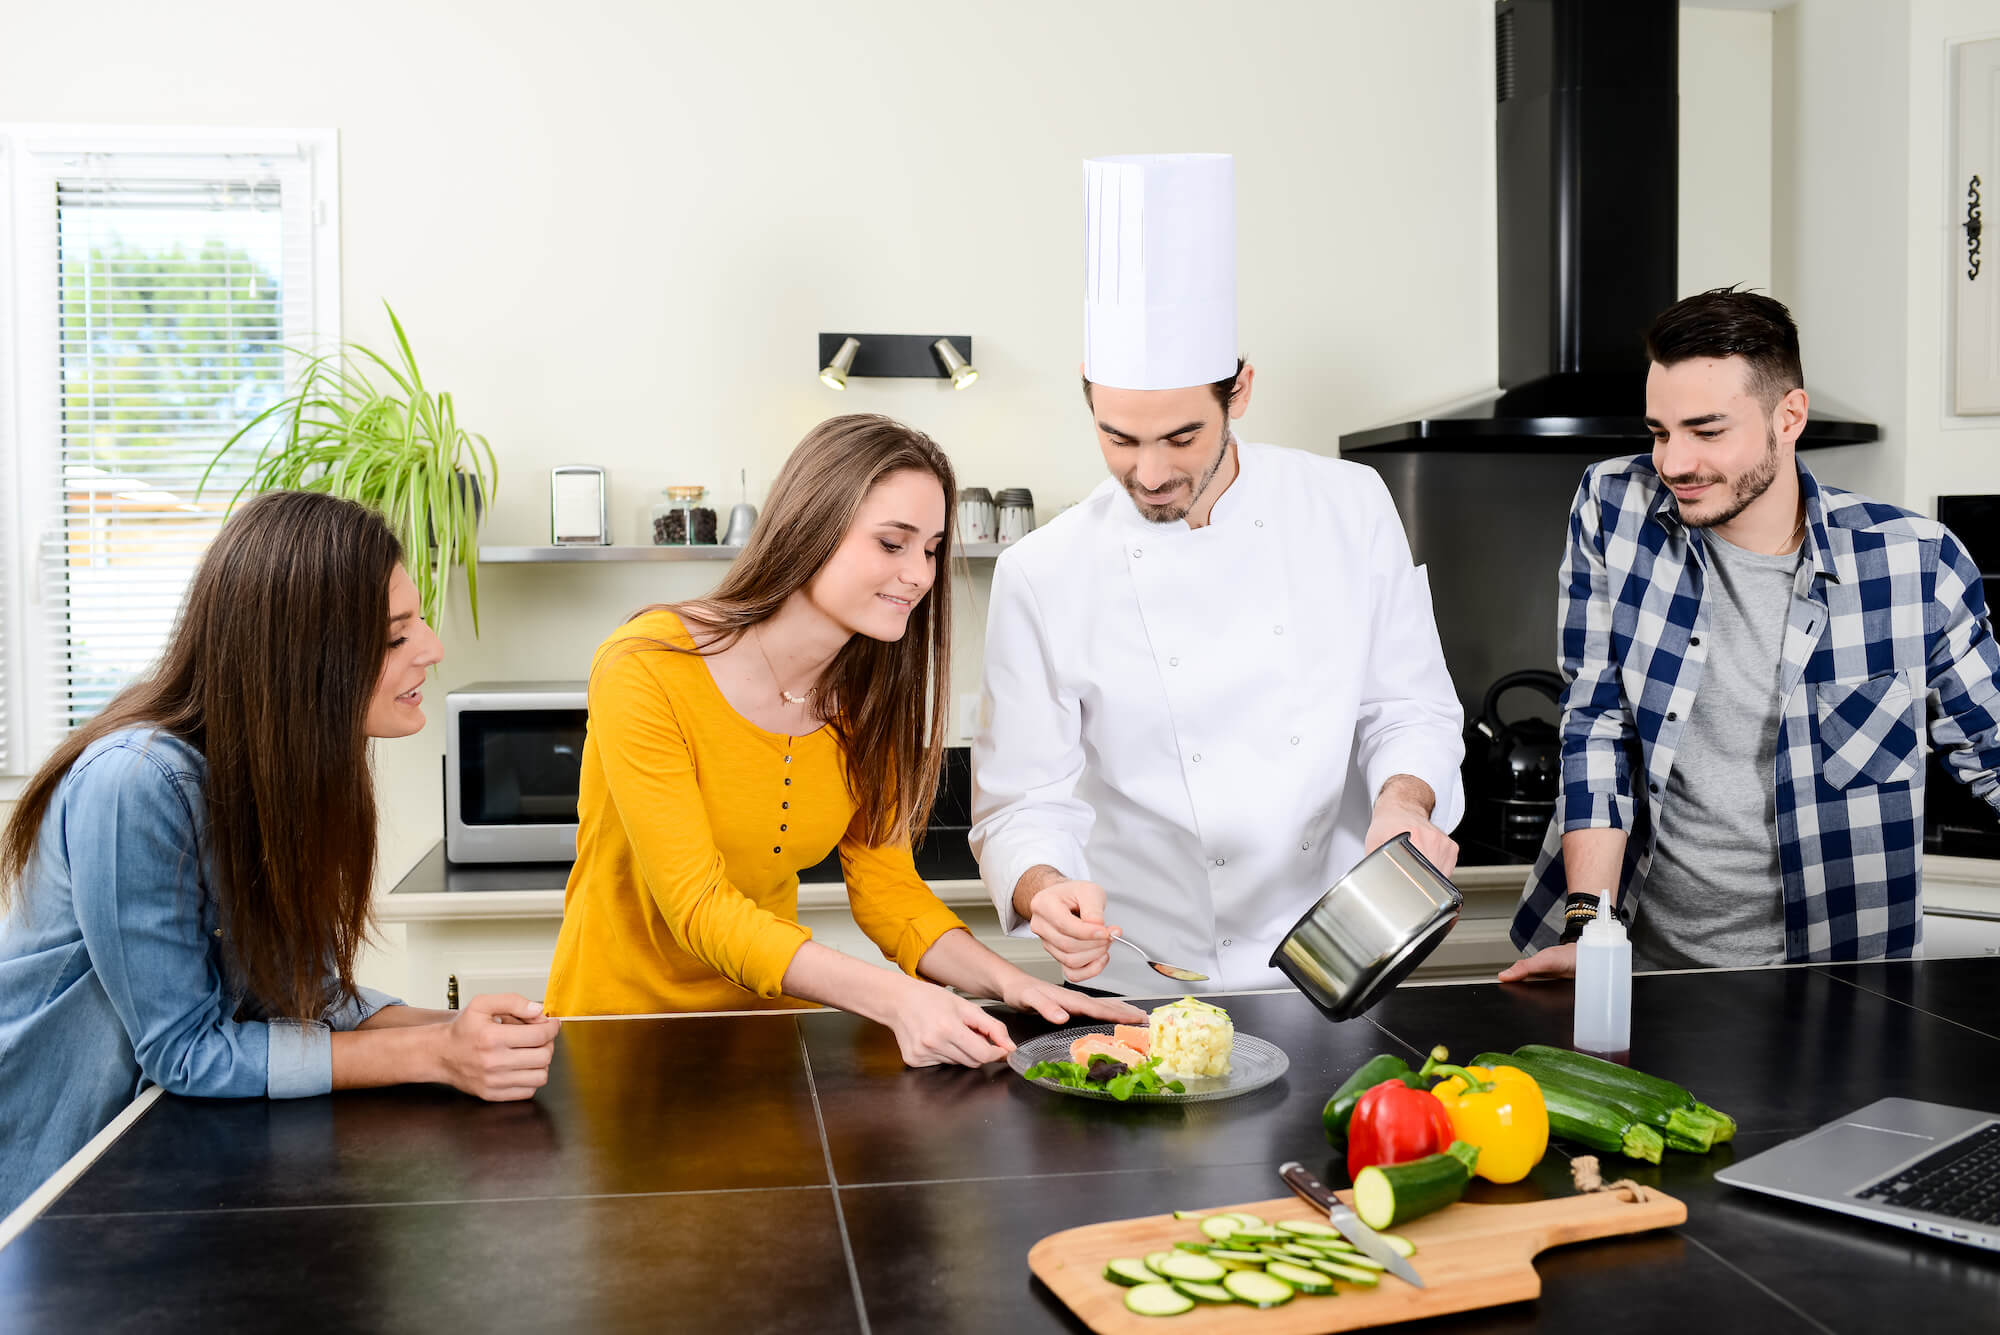 A personal private chef is a professional cook (most likely with a Culinary degree) who will cook you and your family personalized meals.